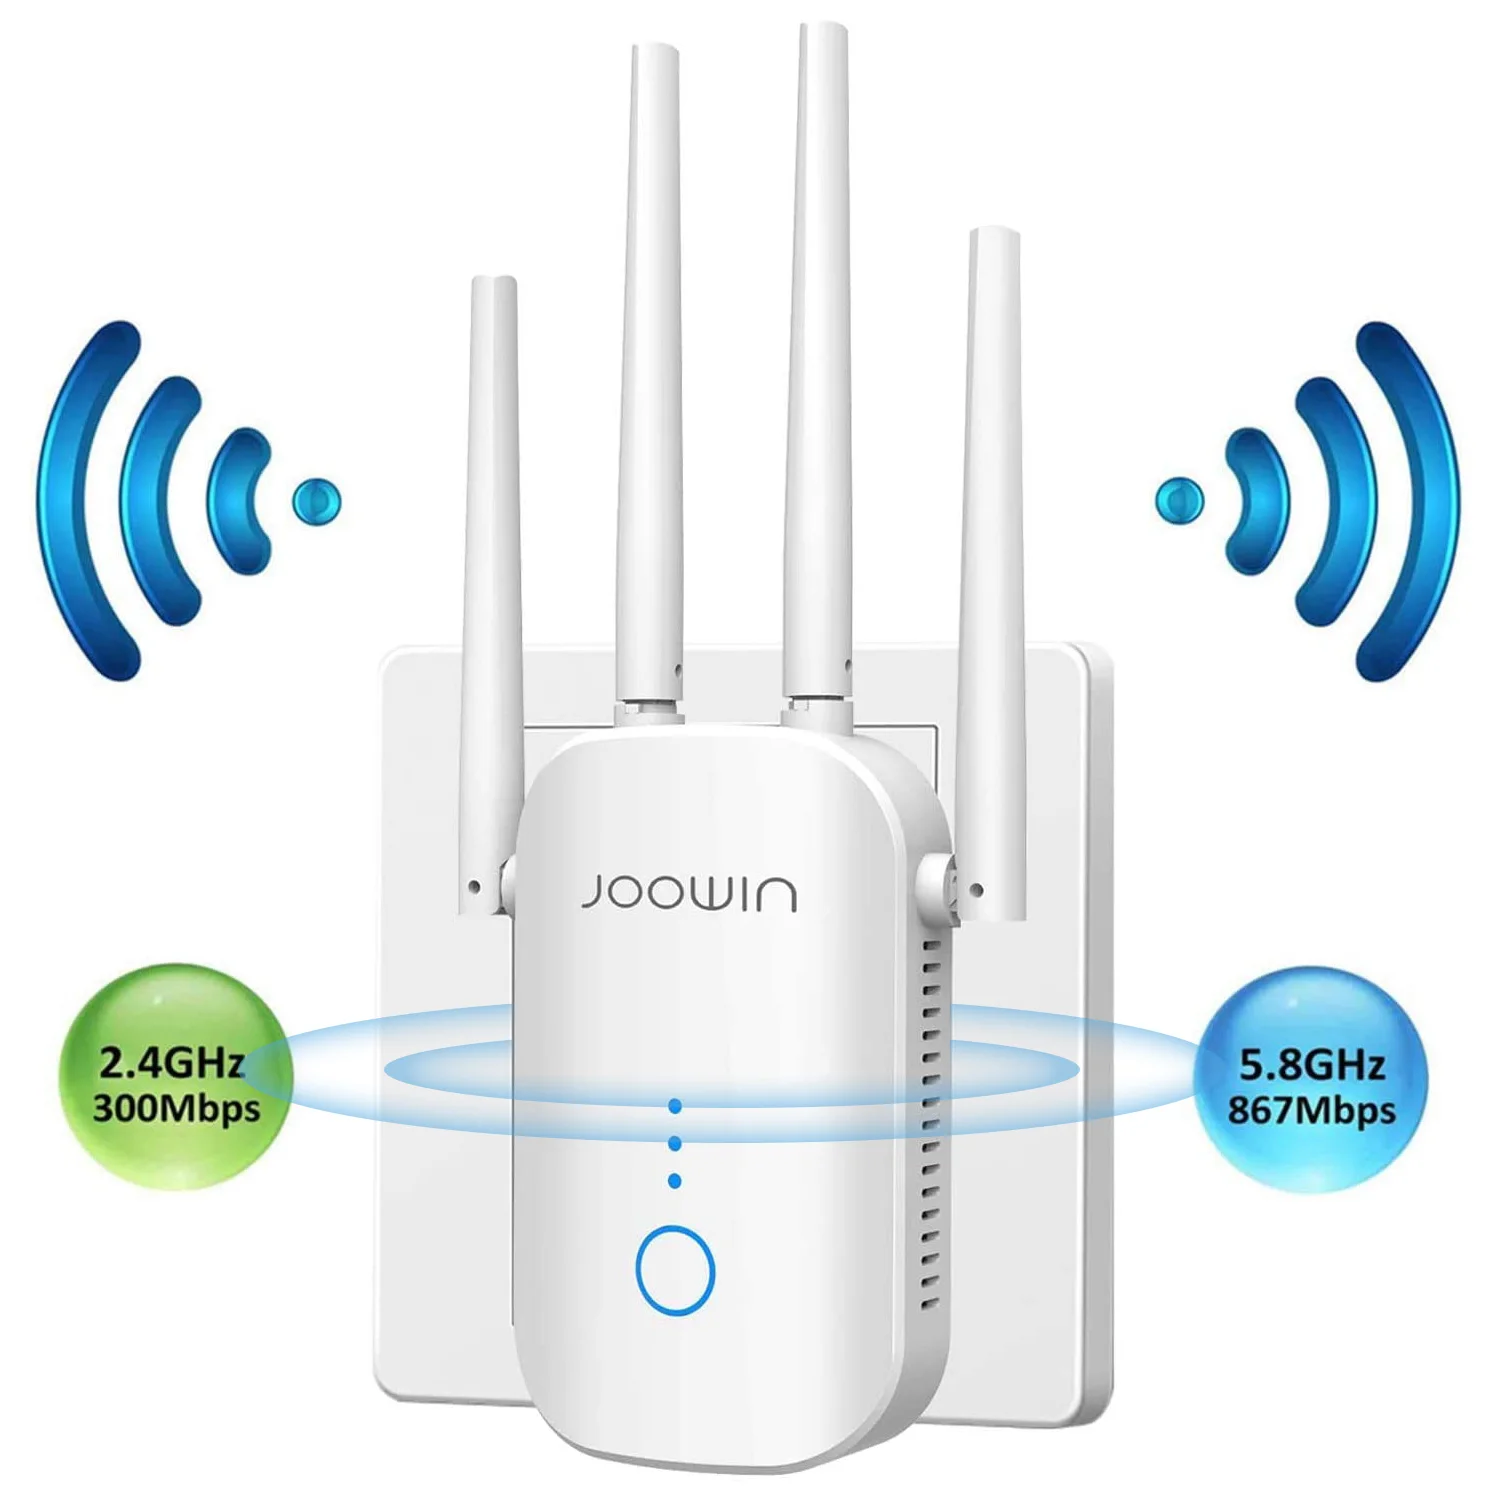 GALAWAY 1200Mbps WiFi Range Extender 2.4GHz and 5GHz Signal Extenders Internet Booster 360 Degree WiFi Booster Signal Amplifier with 4 Antennas White 